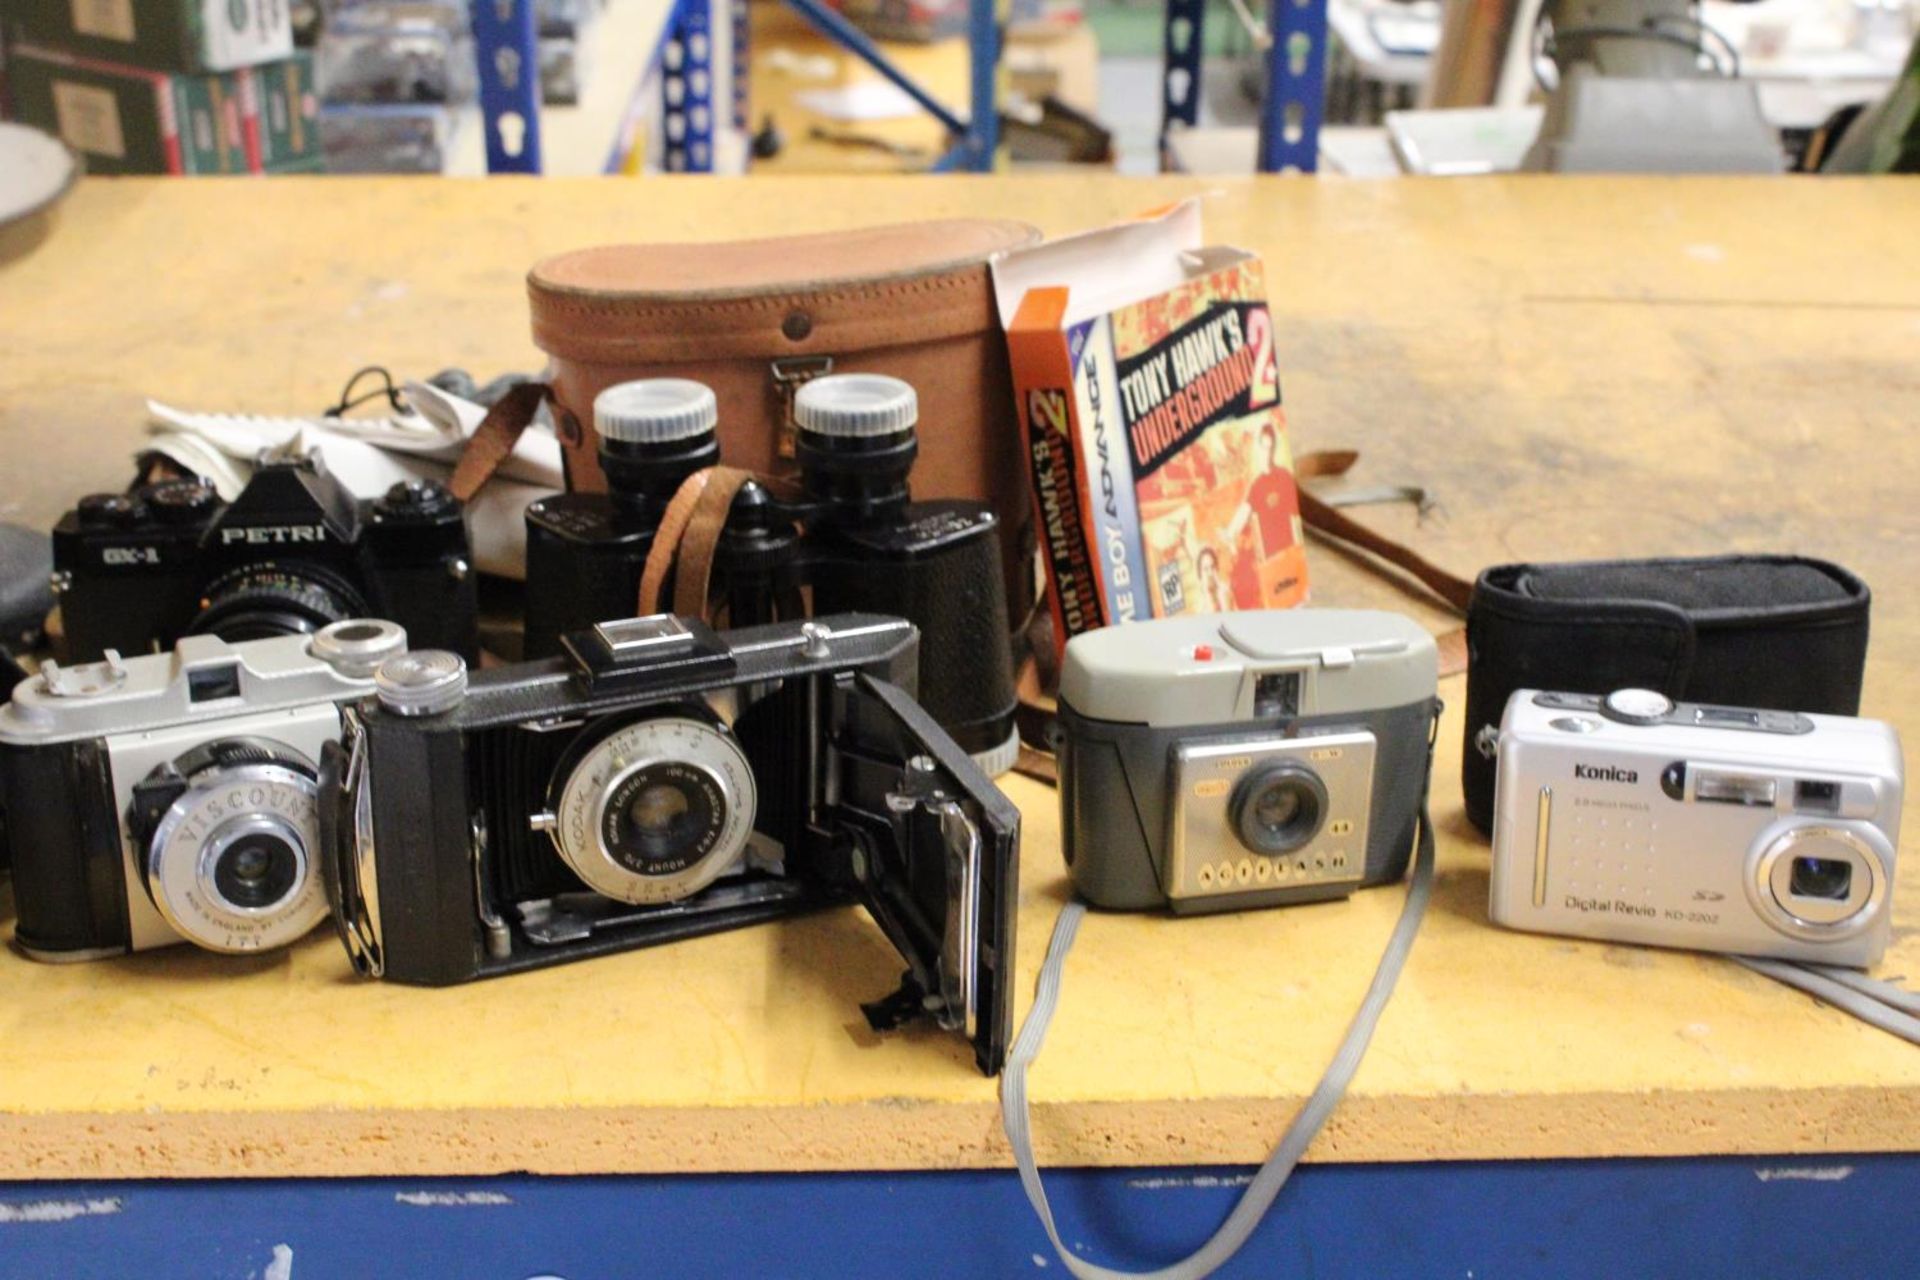 A COLLECTION OF VINTAGE CAMERAS TO INCLUDE A SIX 20 KODAK, AGILUX AGIFLASH, SONY CYBERSHOT, KONICA - Image 2 of 7